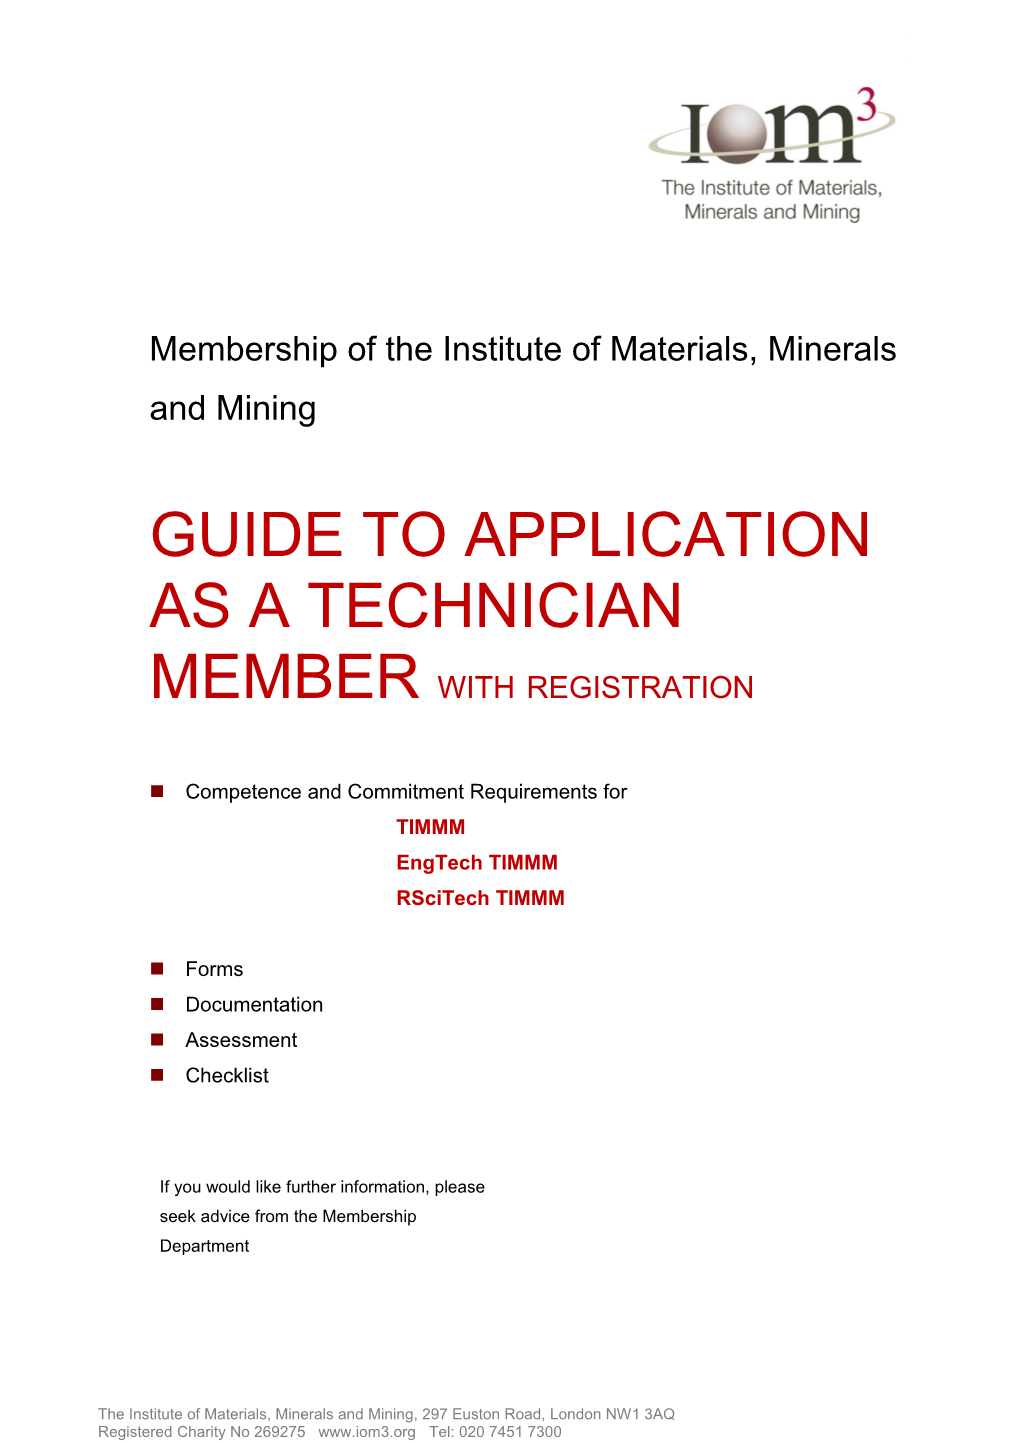 Guide to Application As a Technician Member